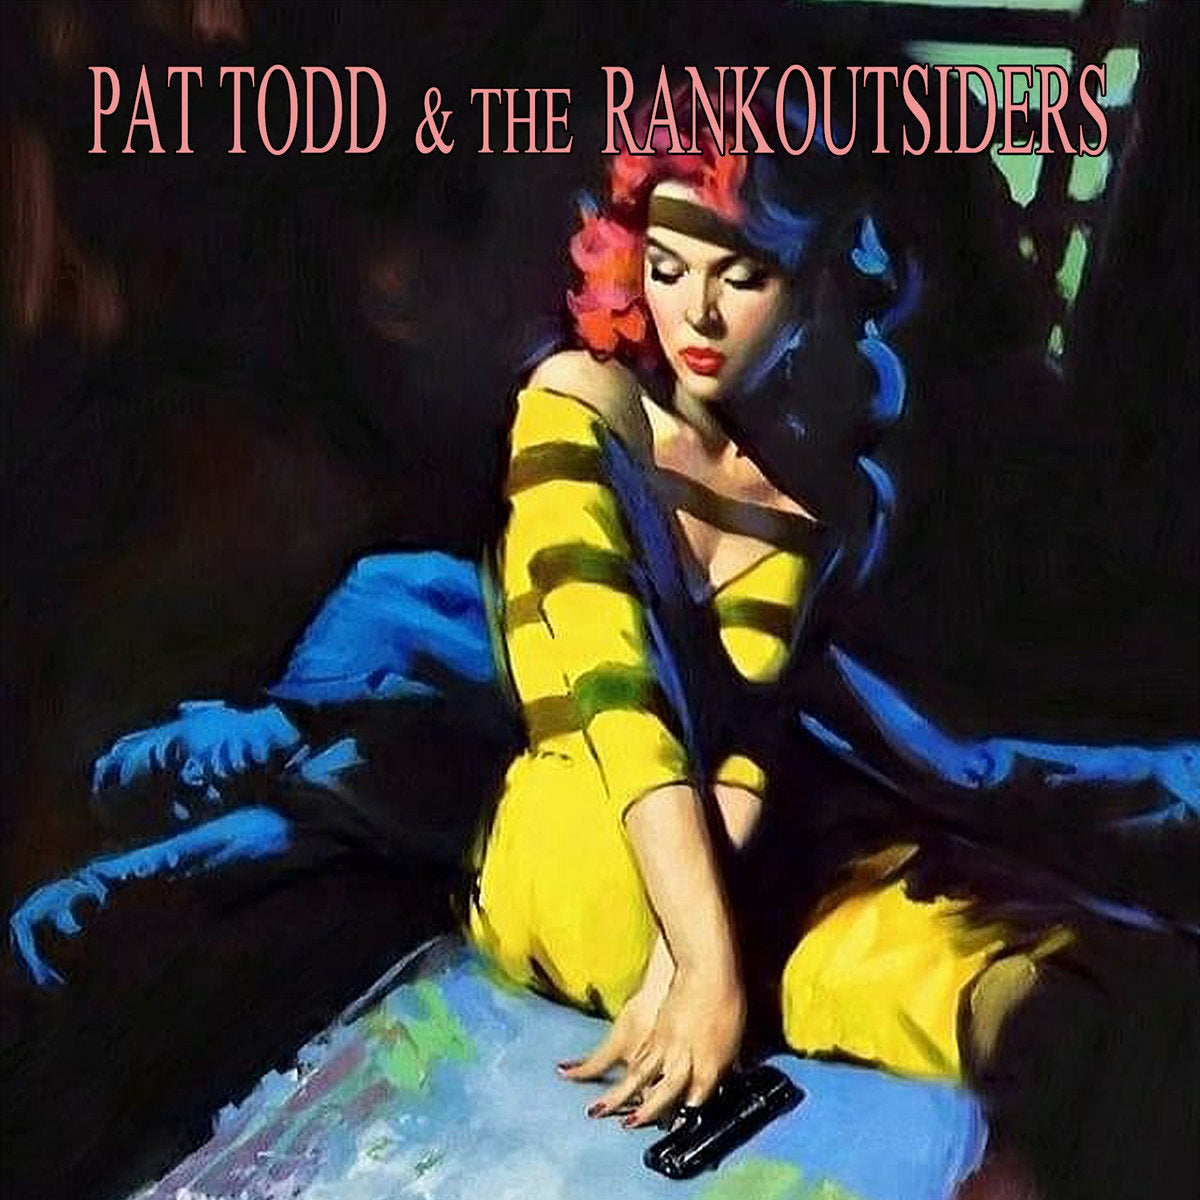 Pat Todd & The Rankoutsiders- You Might Be Through With the Past 7”